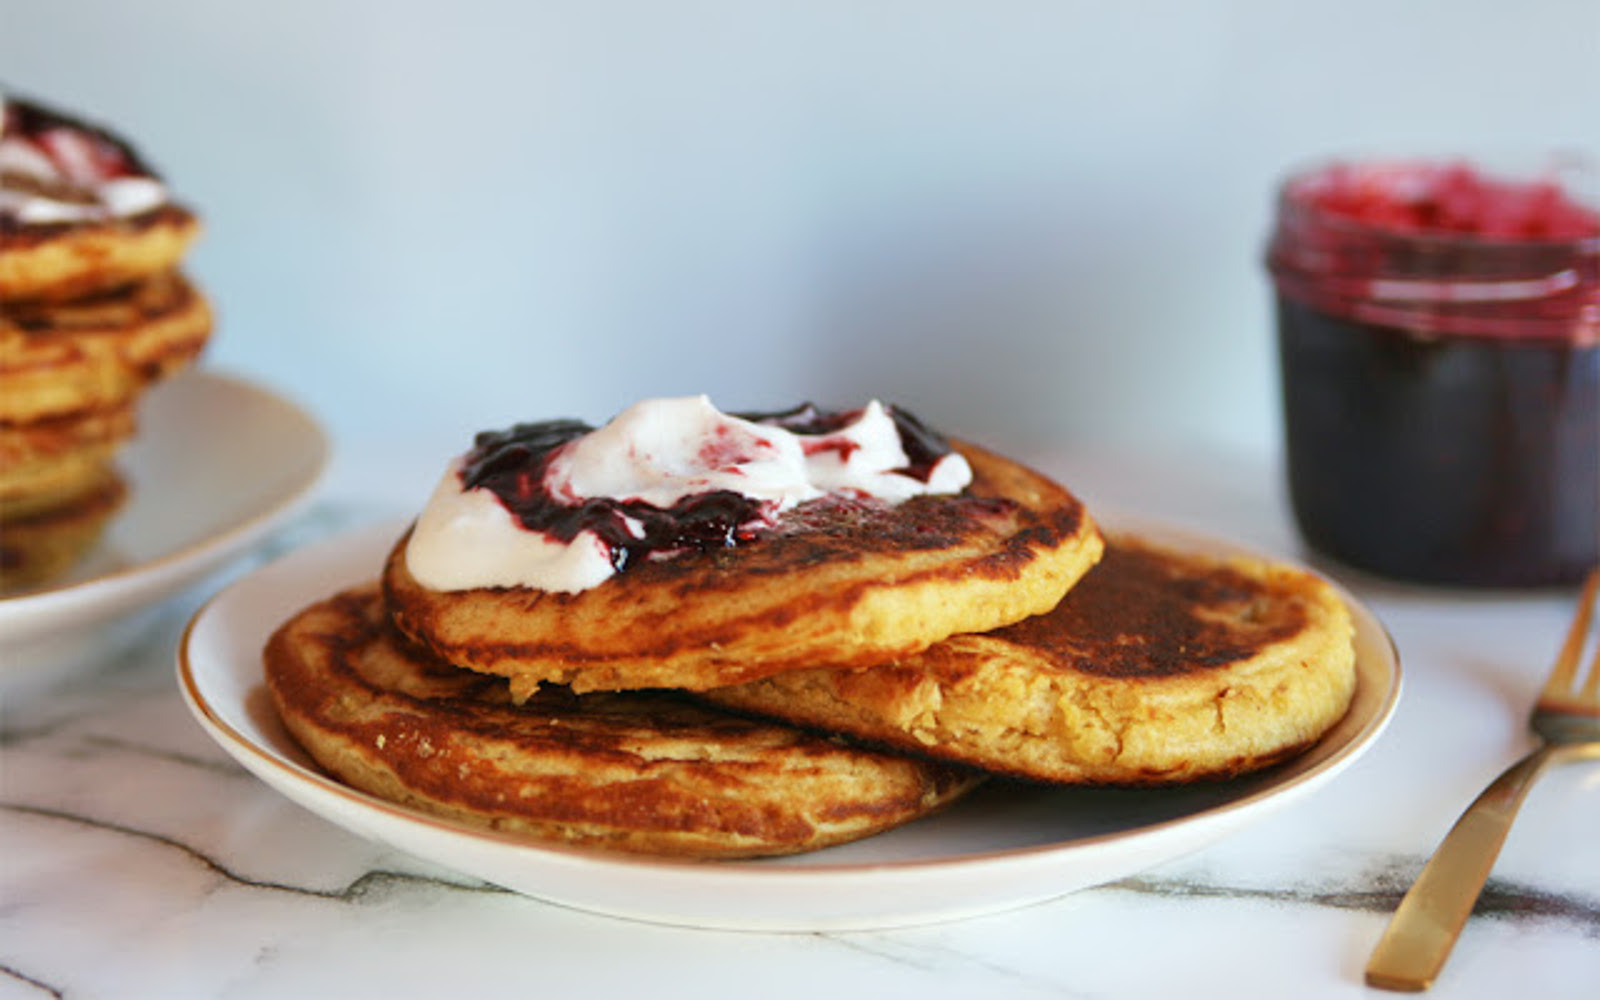 Vegan Gluten-Free Orange Pancakes with Berry Compote and whipped cream 1